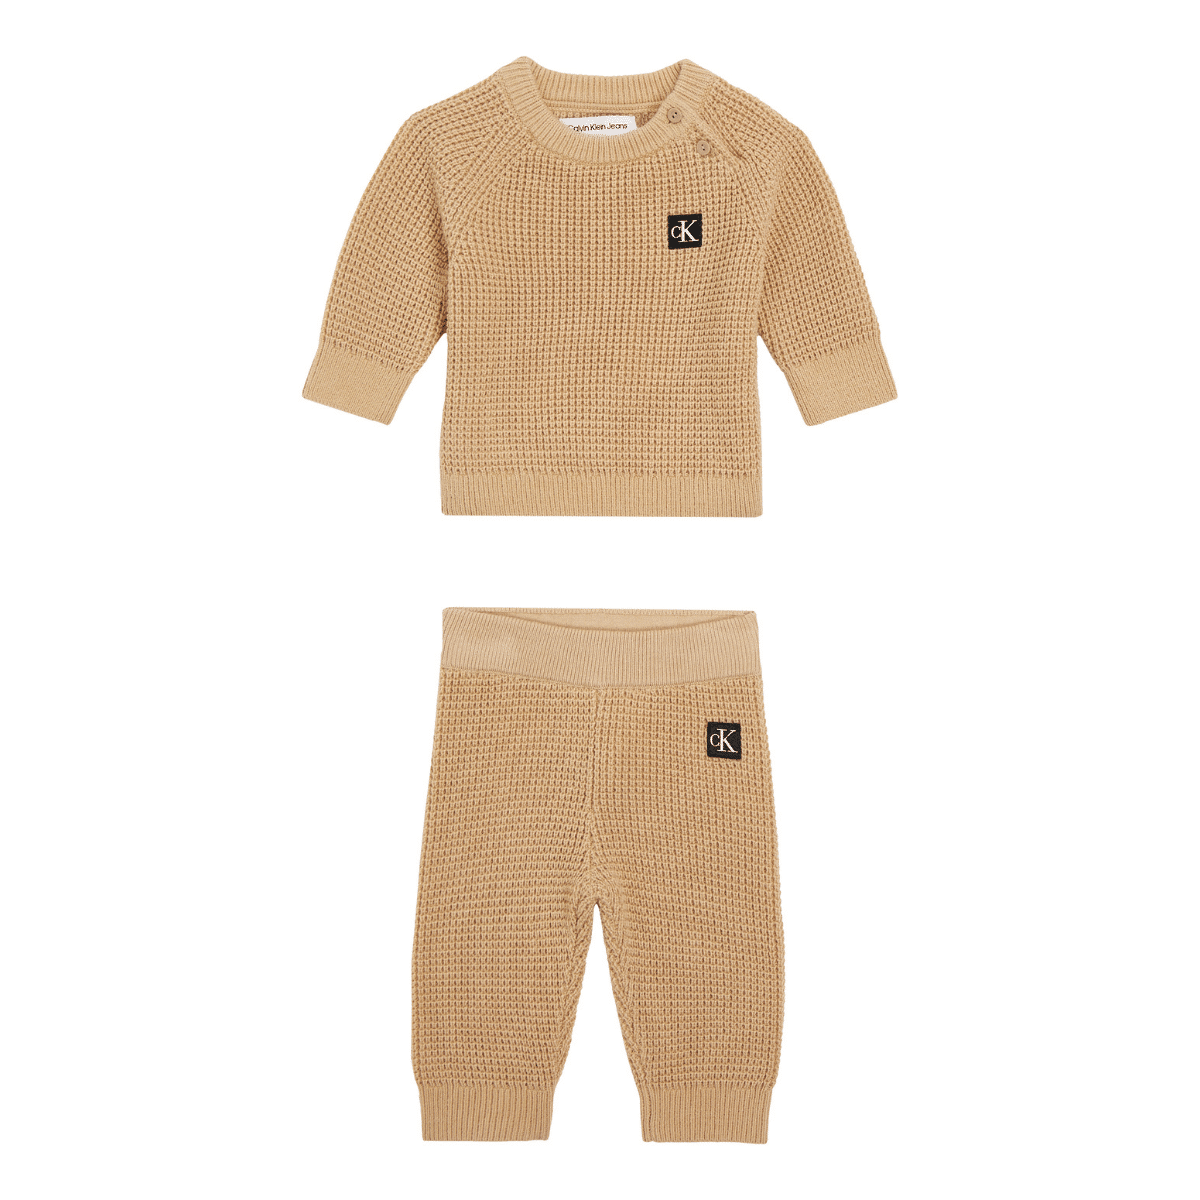 CK baby camel waffle tuck knitted set